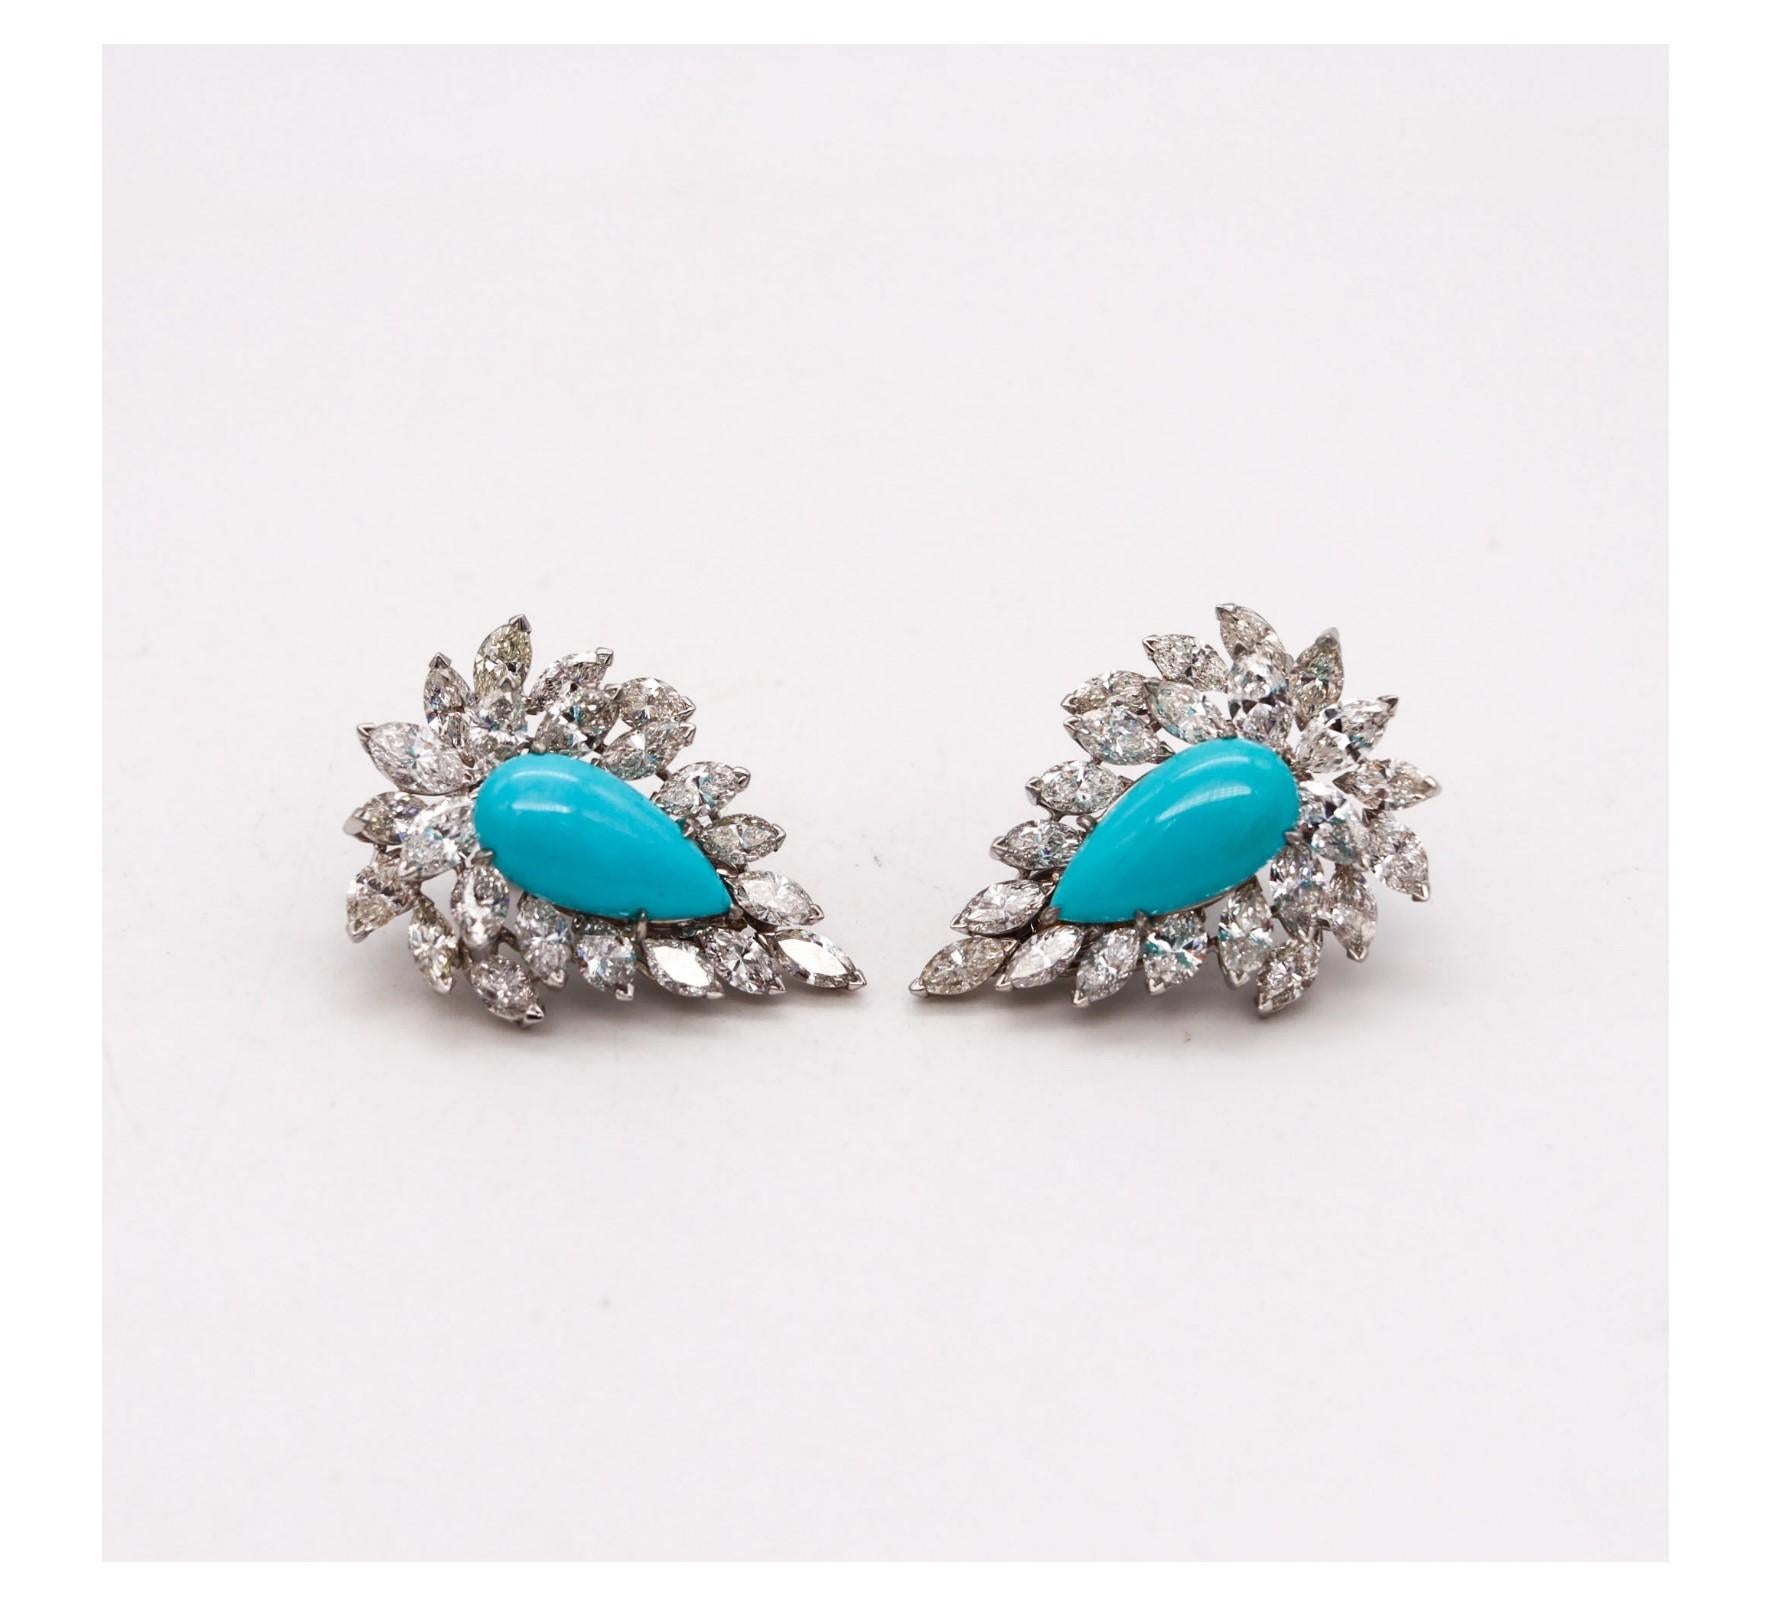 Exceptional gem-set pair of cocktail clips Earrings.

A fabulous pair of cluster earrings, crafted in the Hollywood Regency patterns in solid .900/.999 platinum and suited with comfortable French omega backs for fastening clips. The posts option for